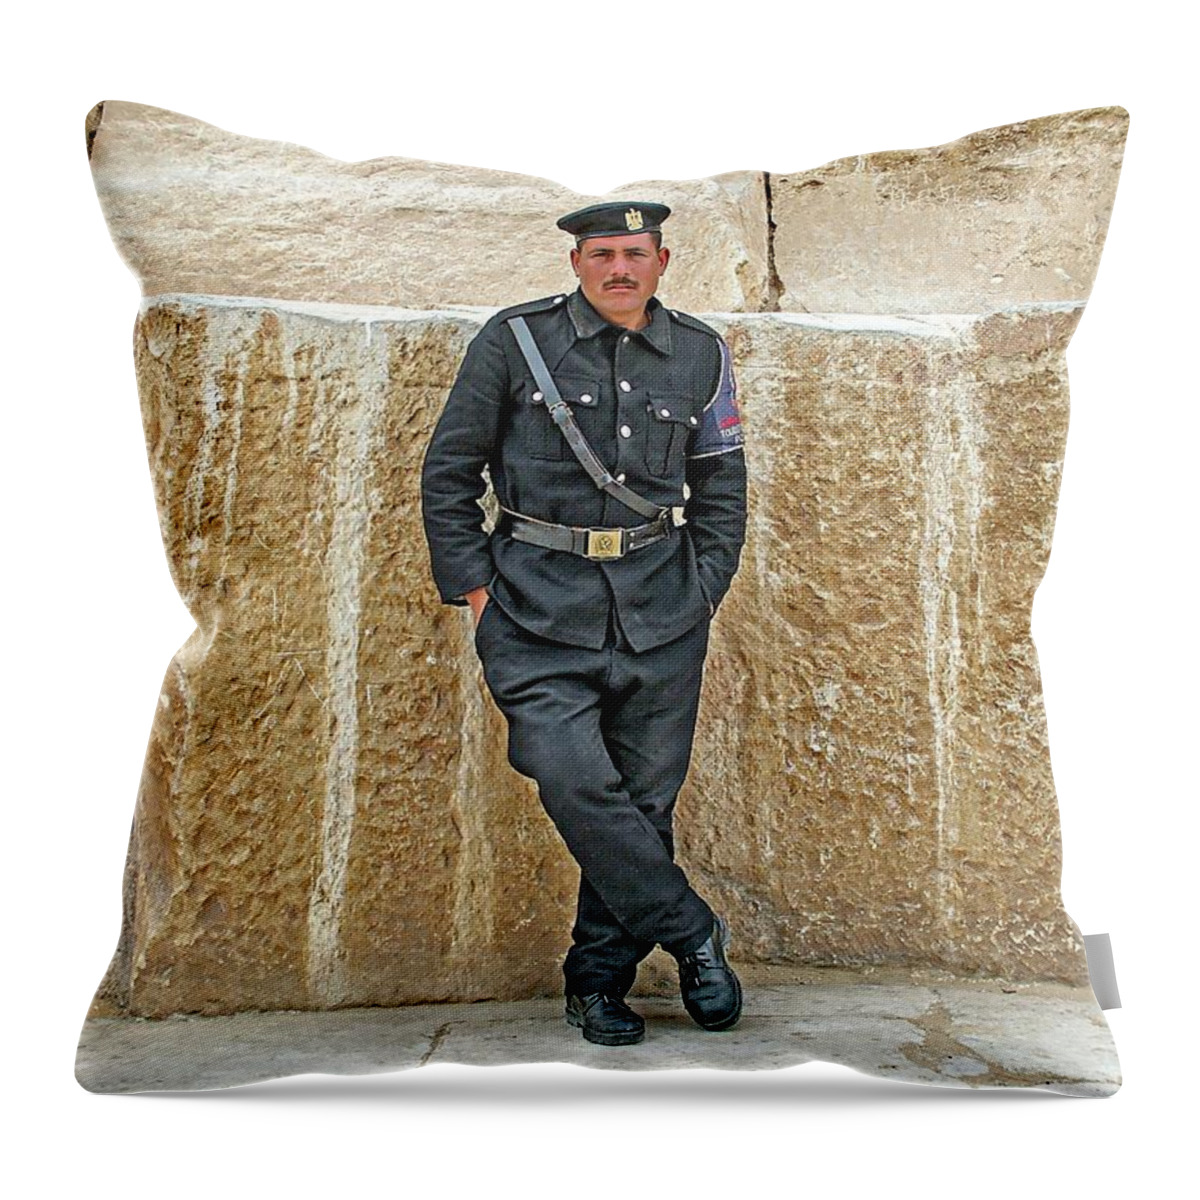 Egypt Throw Pillow featuring the photograph Giza Pyramids Tourist Police by Joseph Hendrix